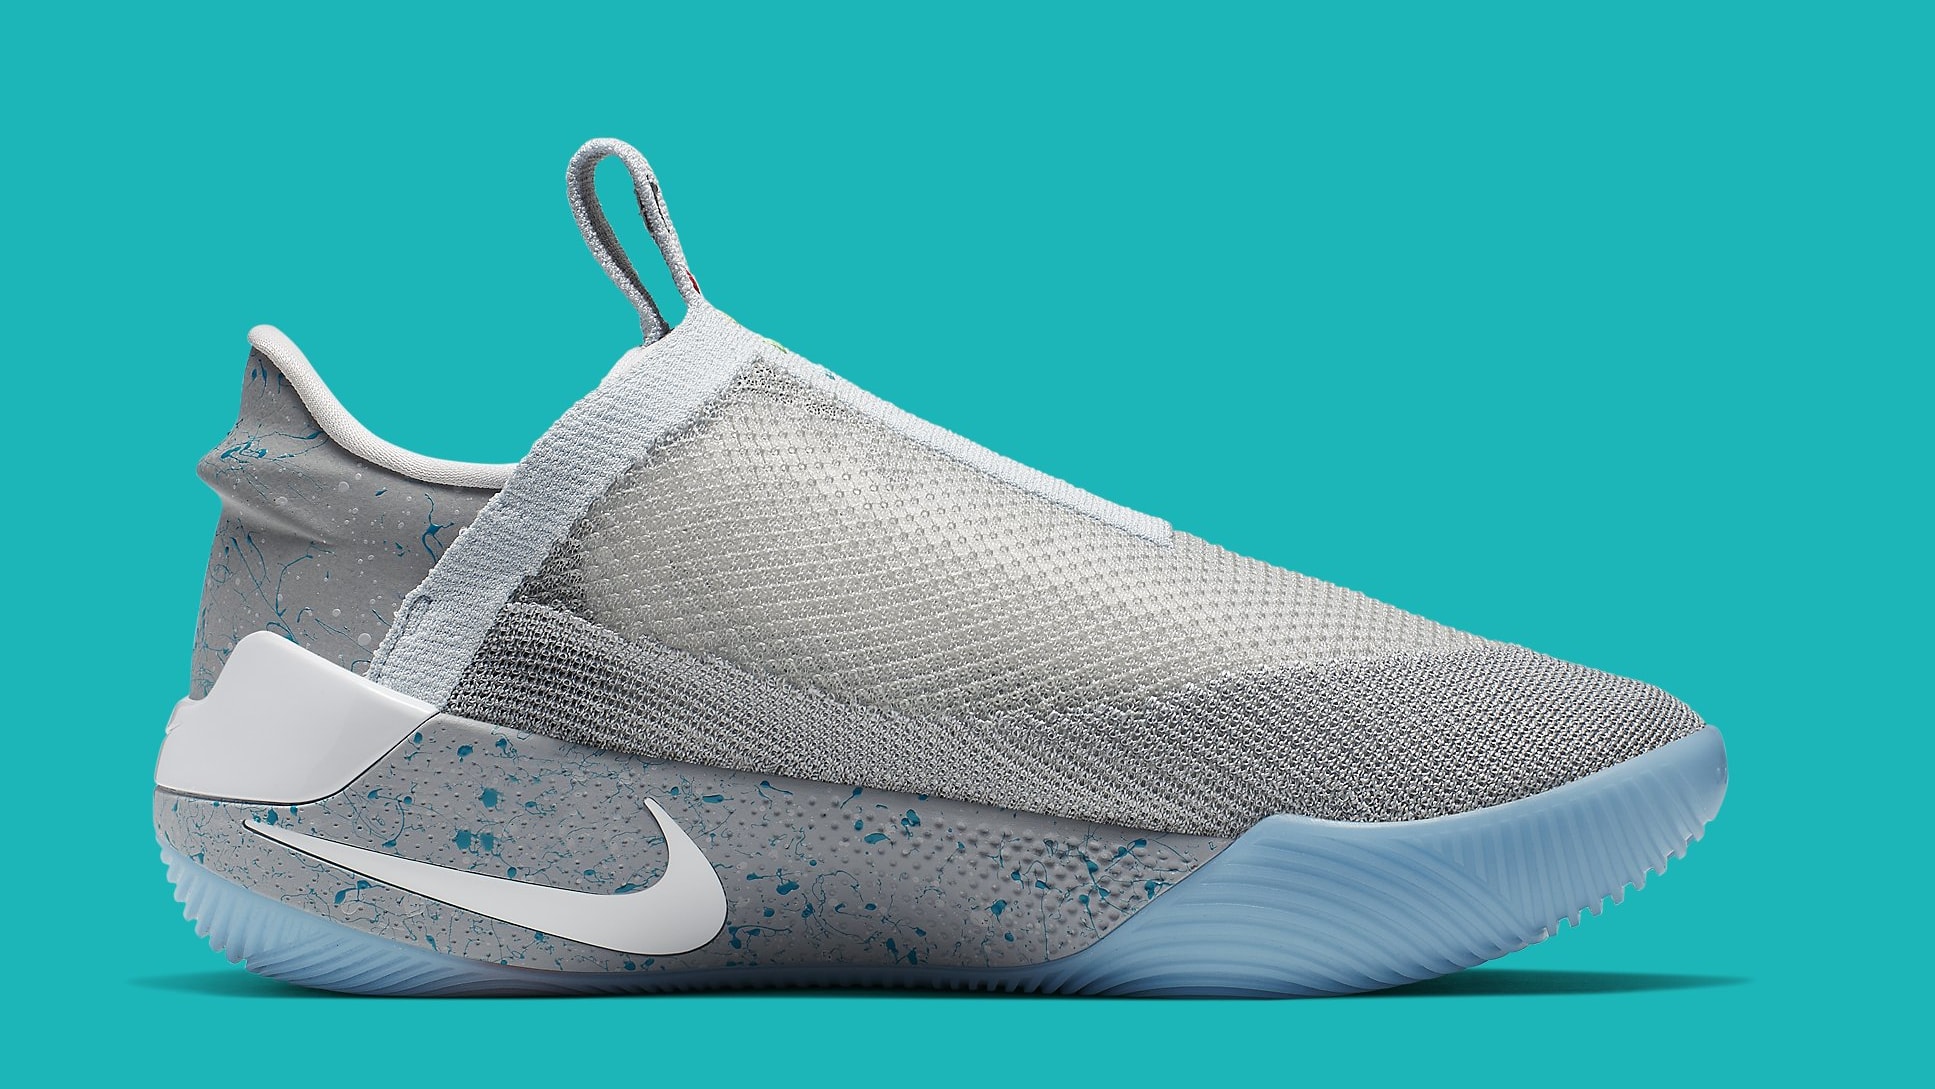 Nike Adapt BB Mag Release Date May 29, 2019 | Sole Collector